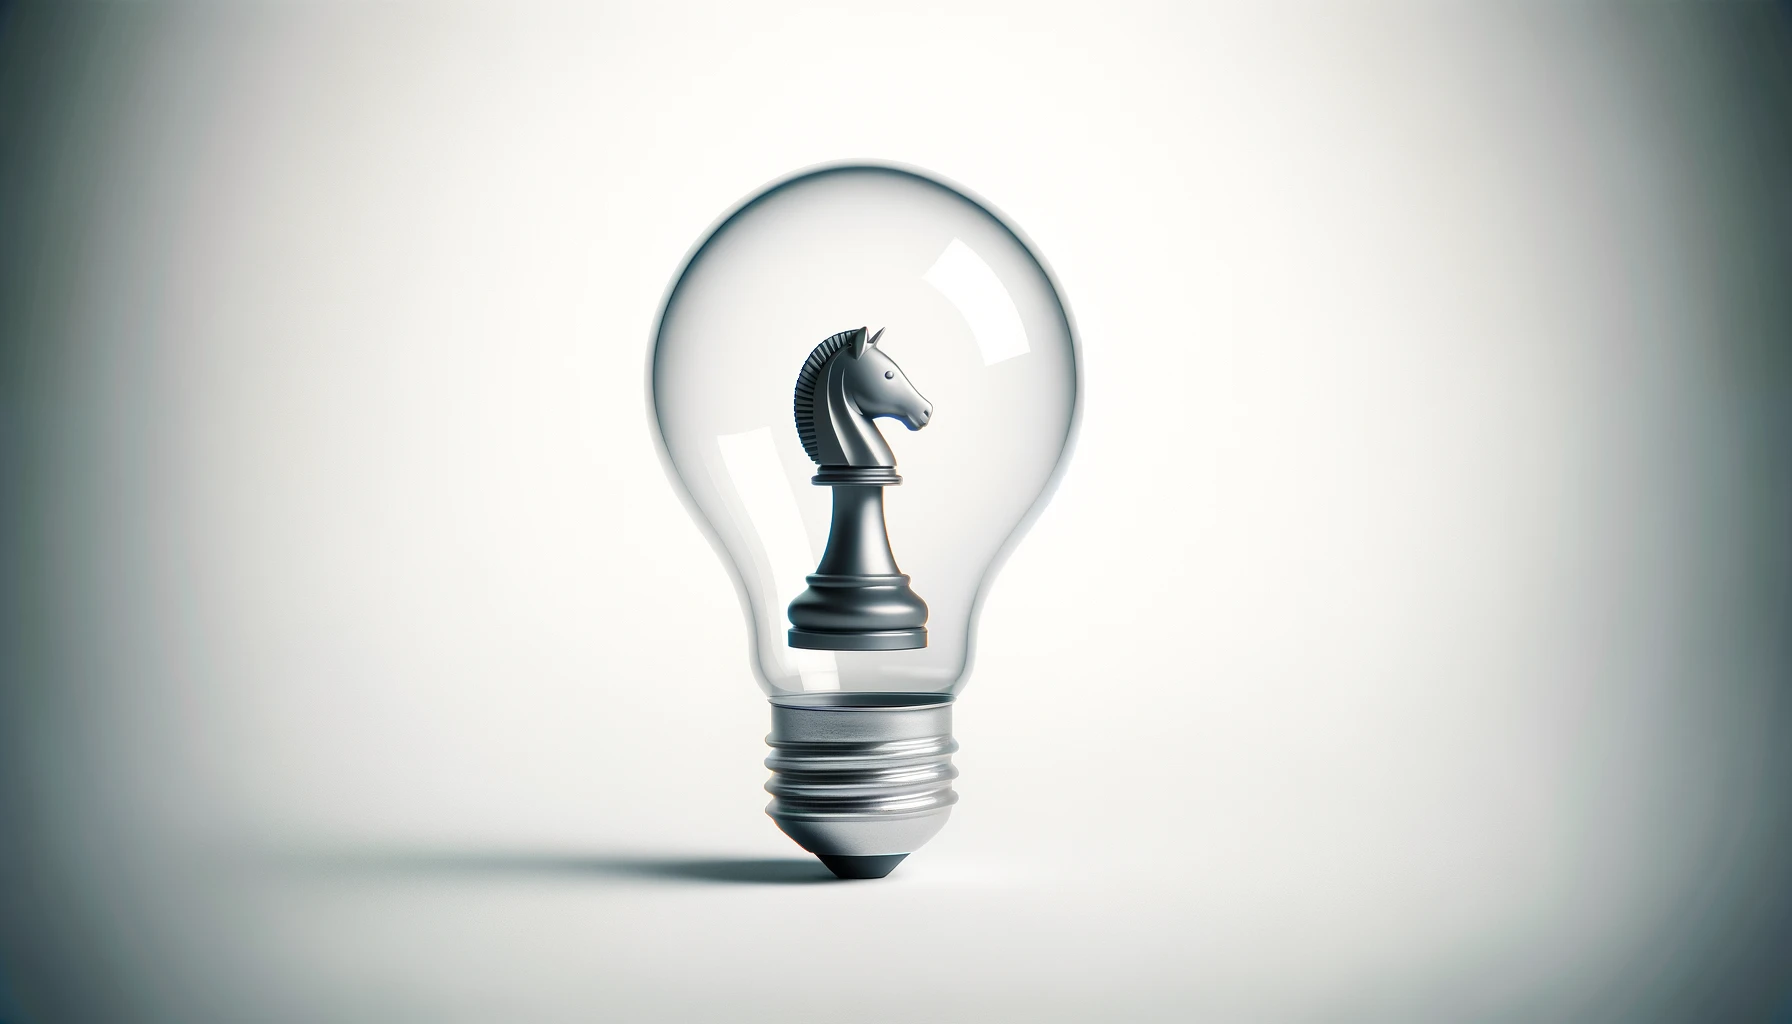 A minimalist image featuring a light bulb with a chess piece, specifically a knight, inside it, placed on a clean, white background.